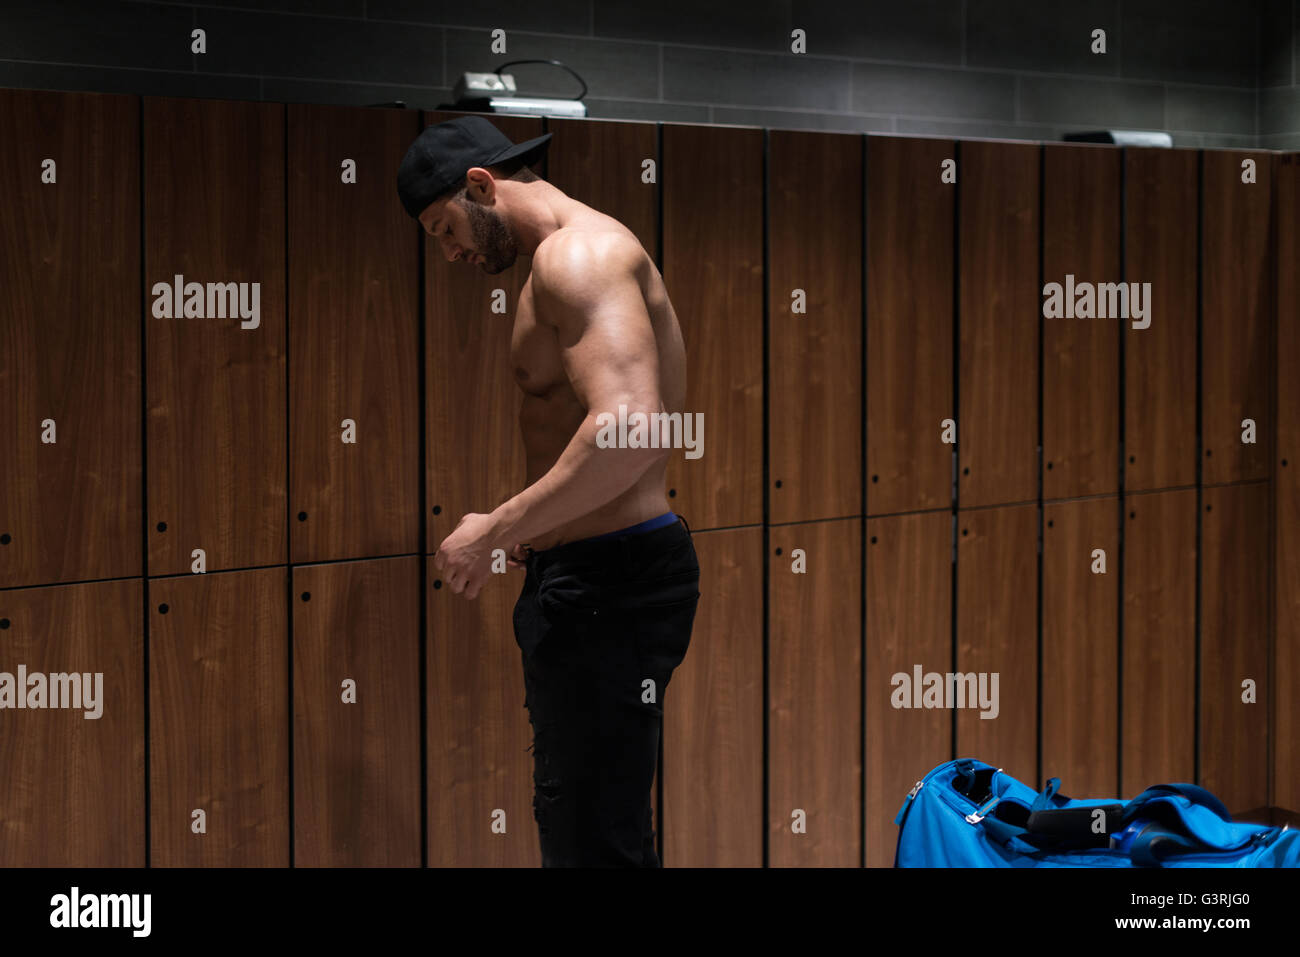 Young Fit Adult Man Changing Clothings In Locker Room Of Gym Facility Stock Photo